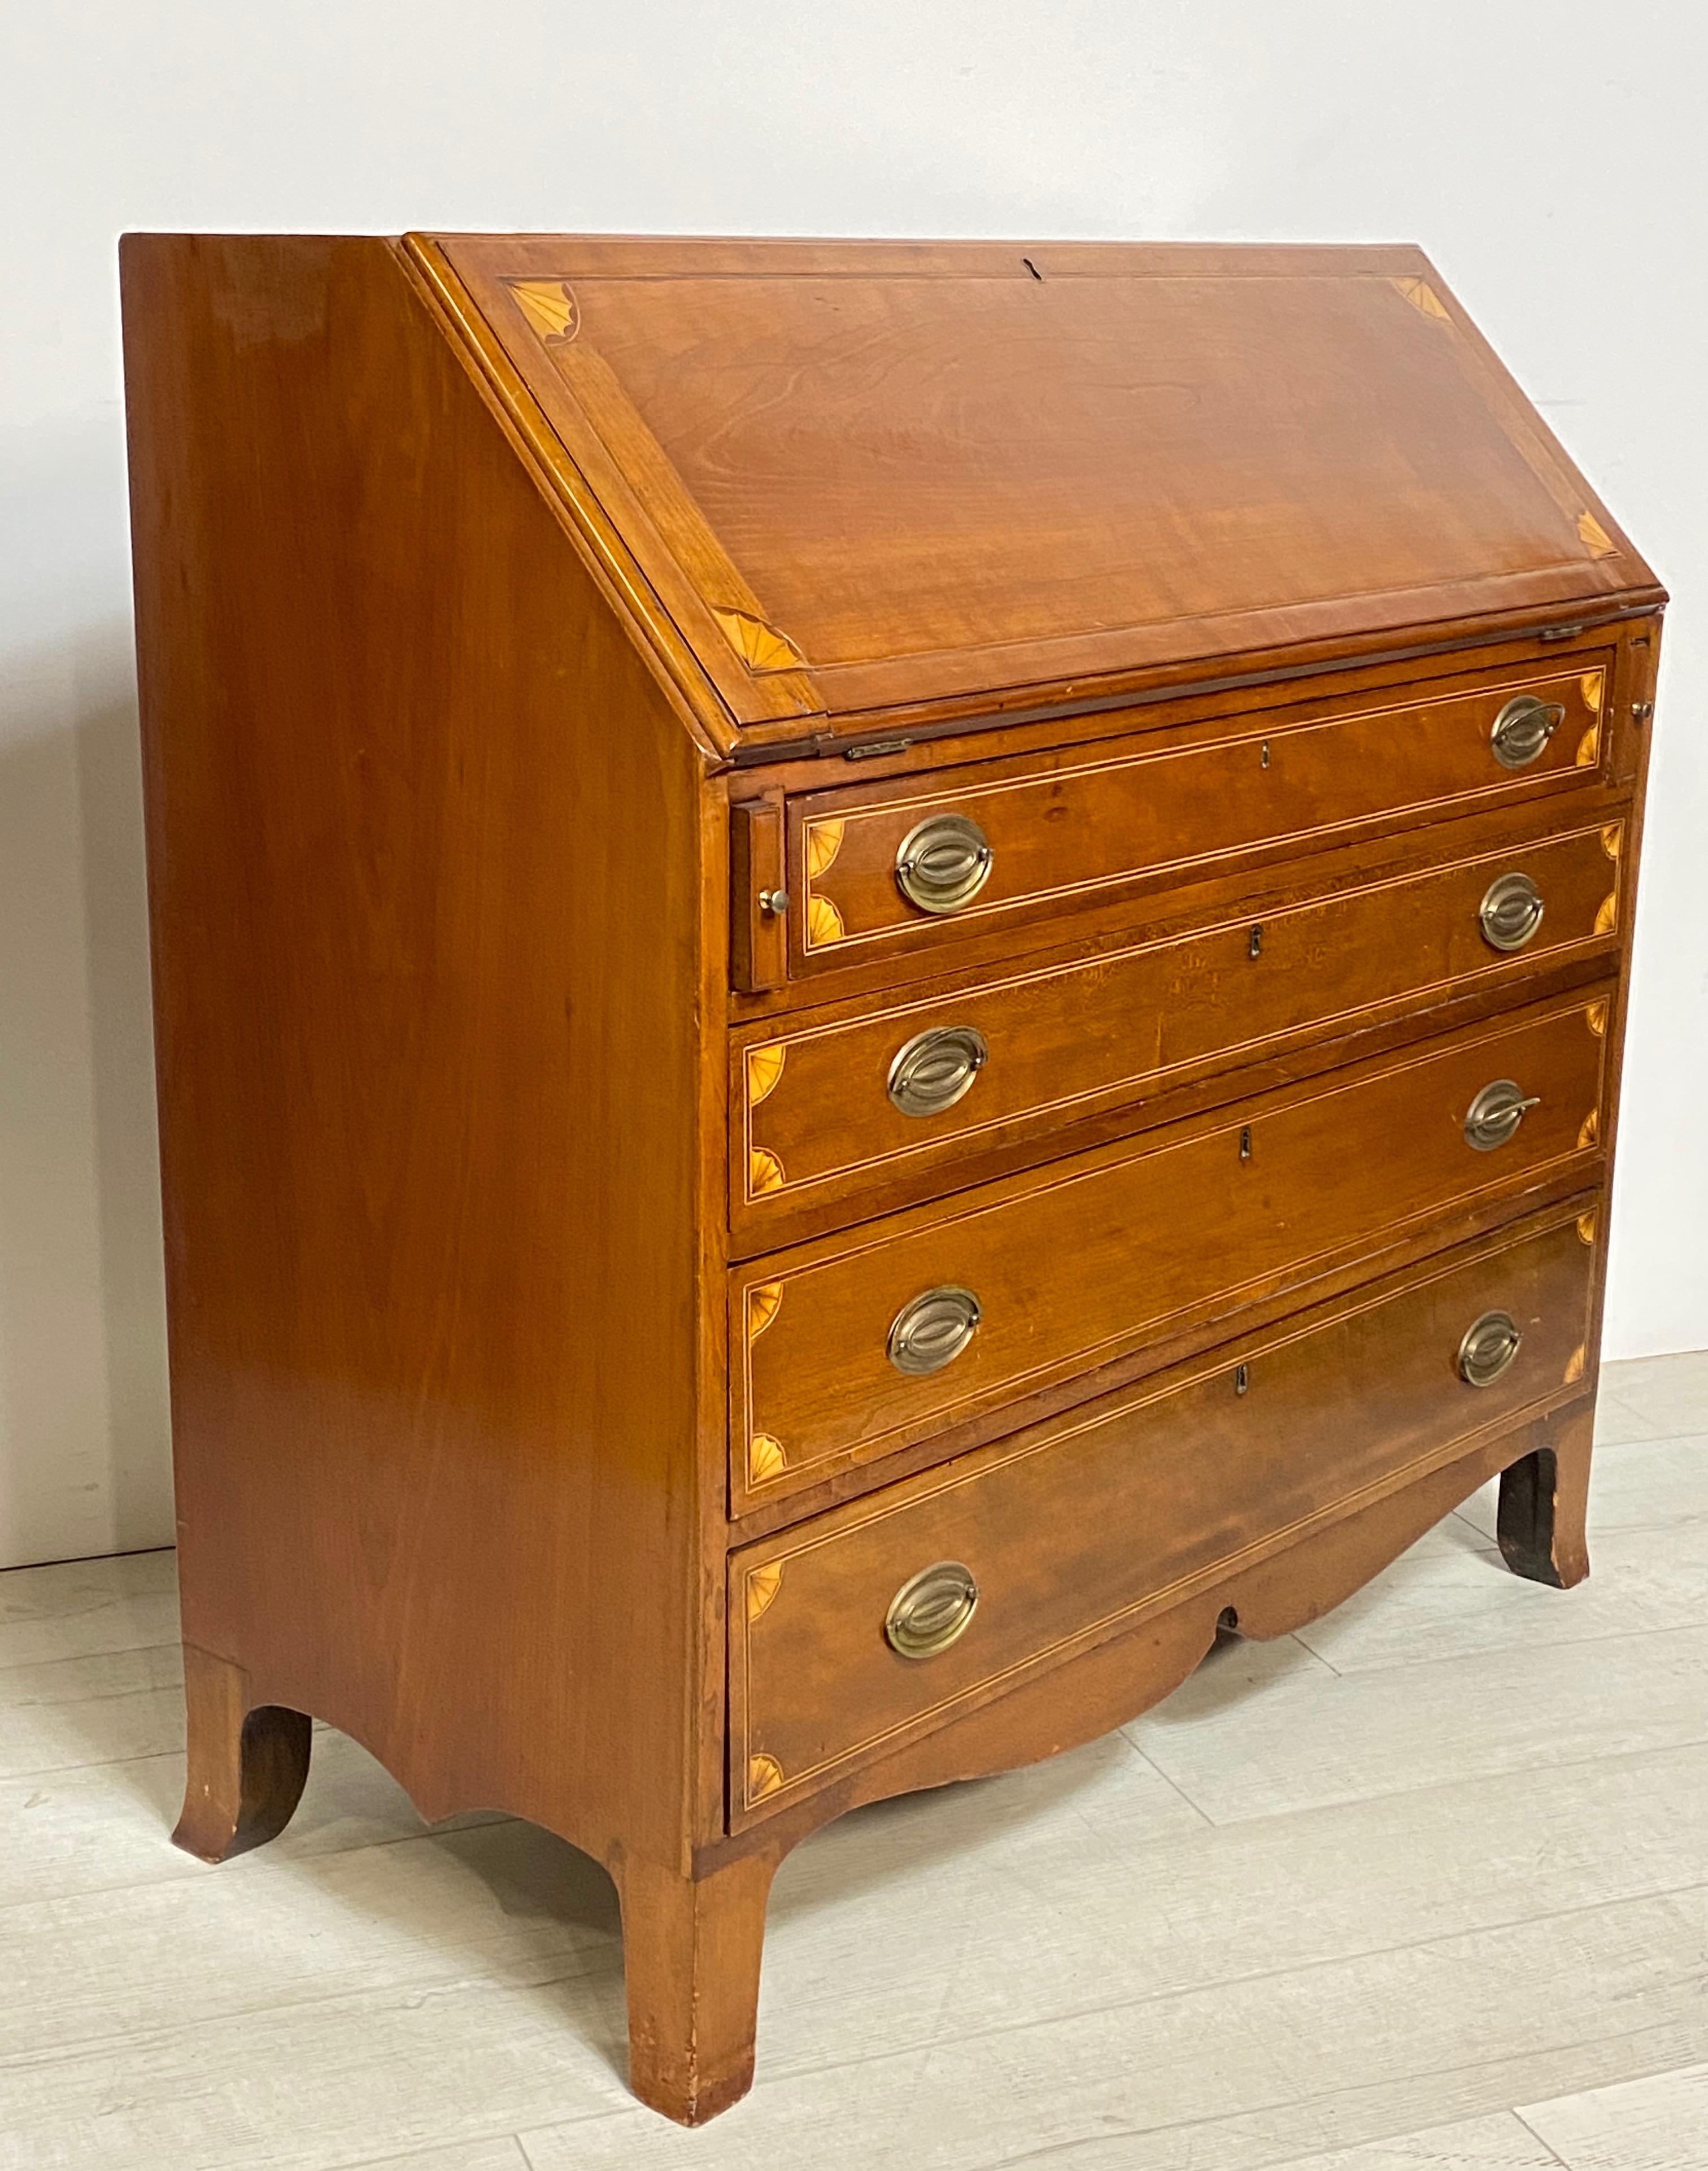 Early 19th century American fall front desk.
Mahogany with satinwood inlay detail. Slant front drops down to reveal fitted interior, and having four drawers below.
Circa 1820.